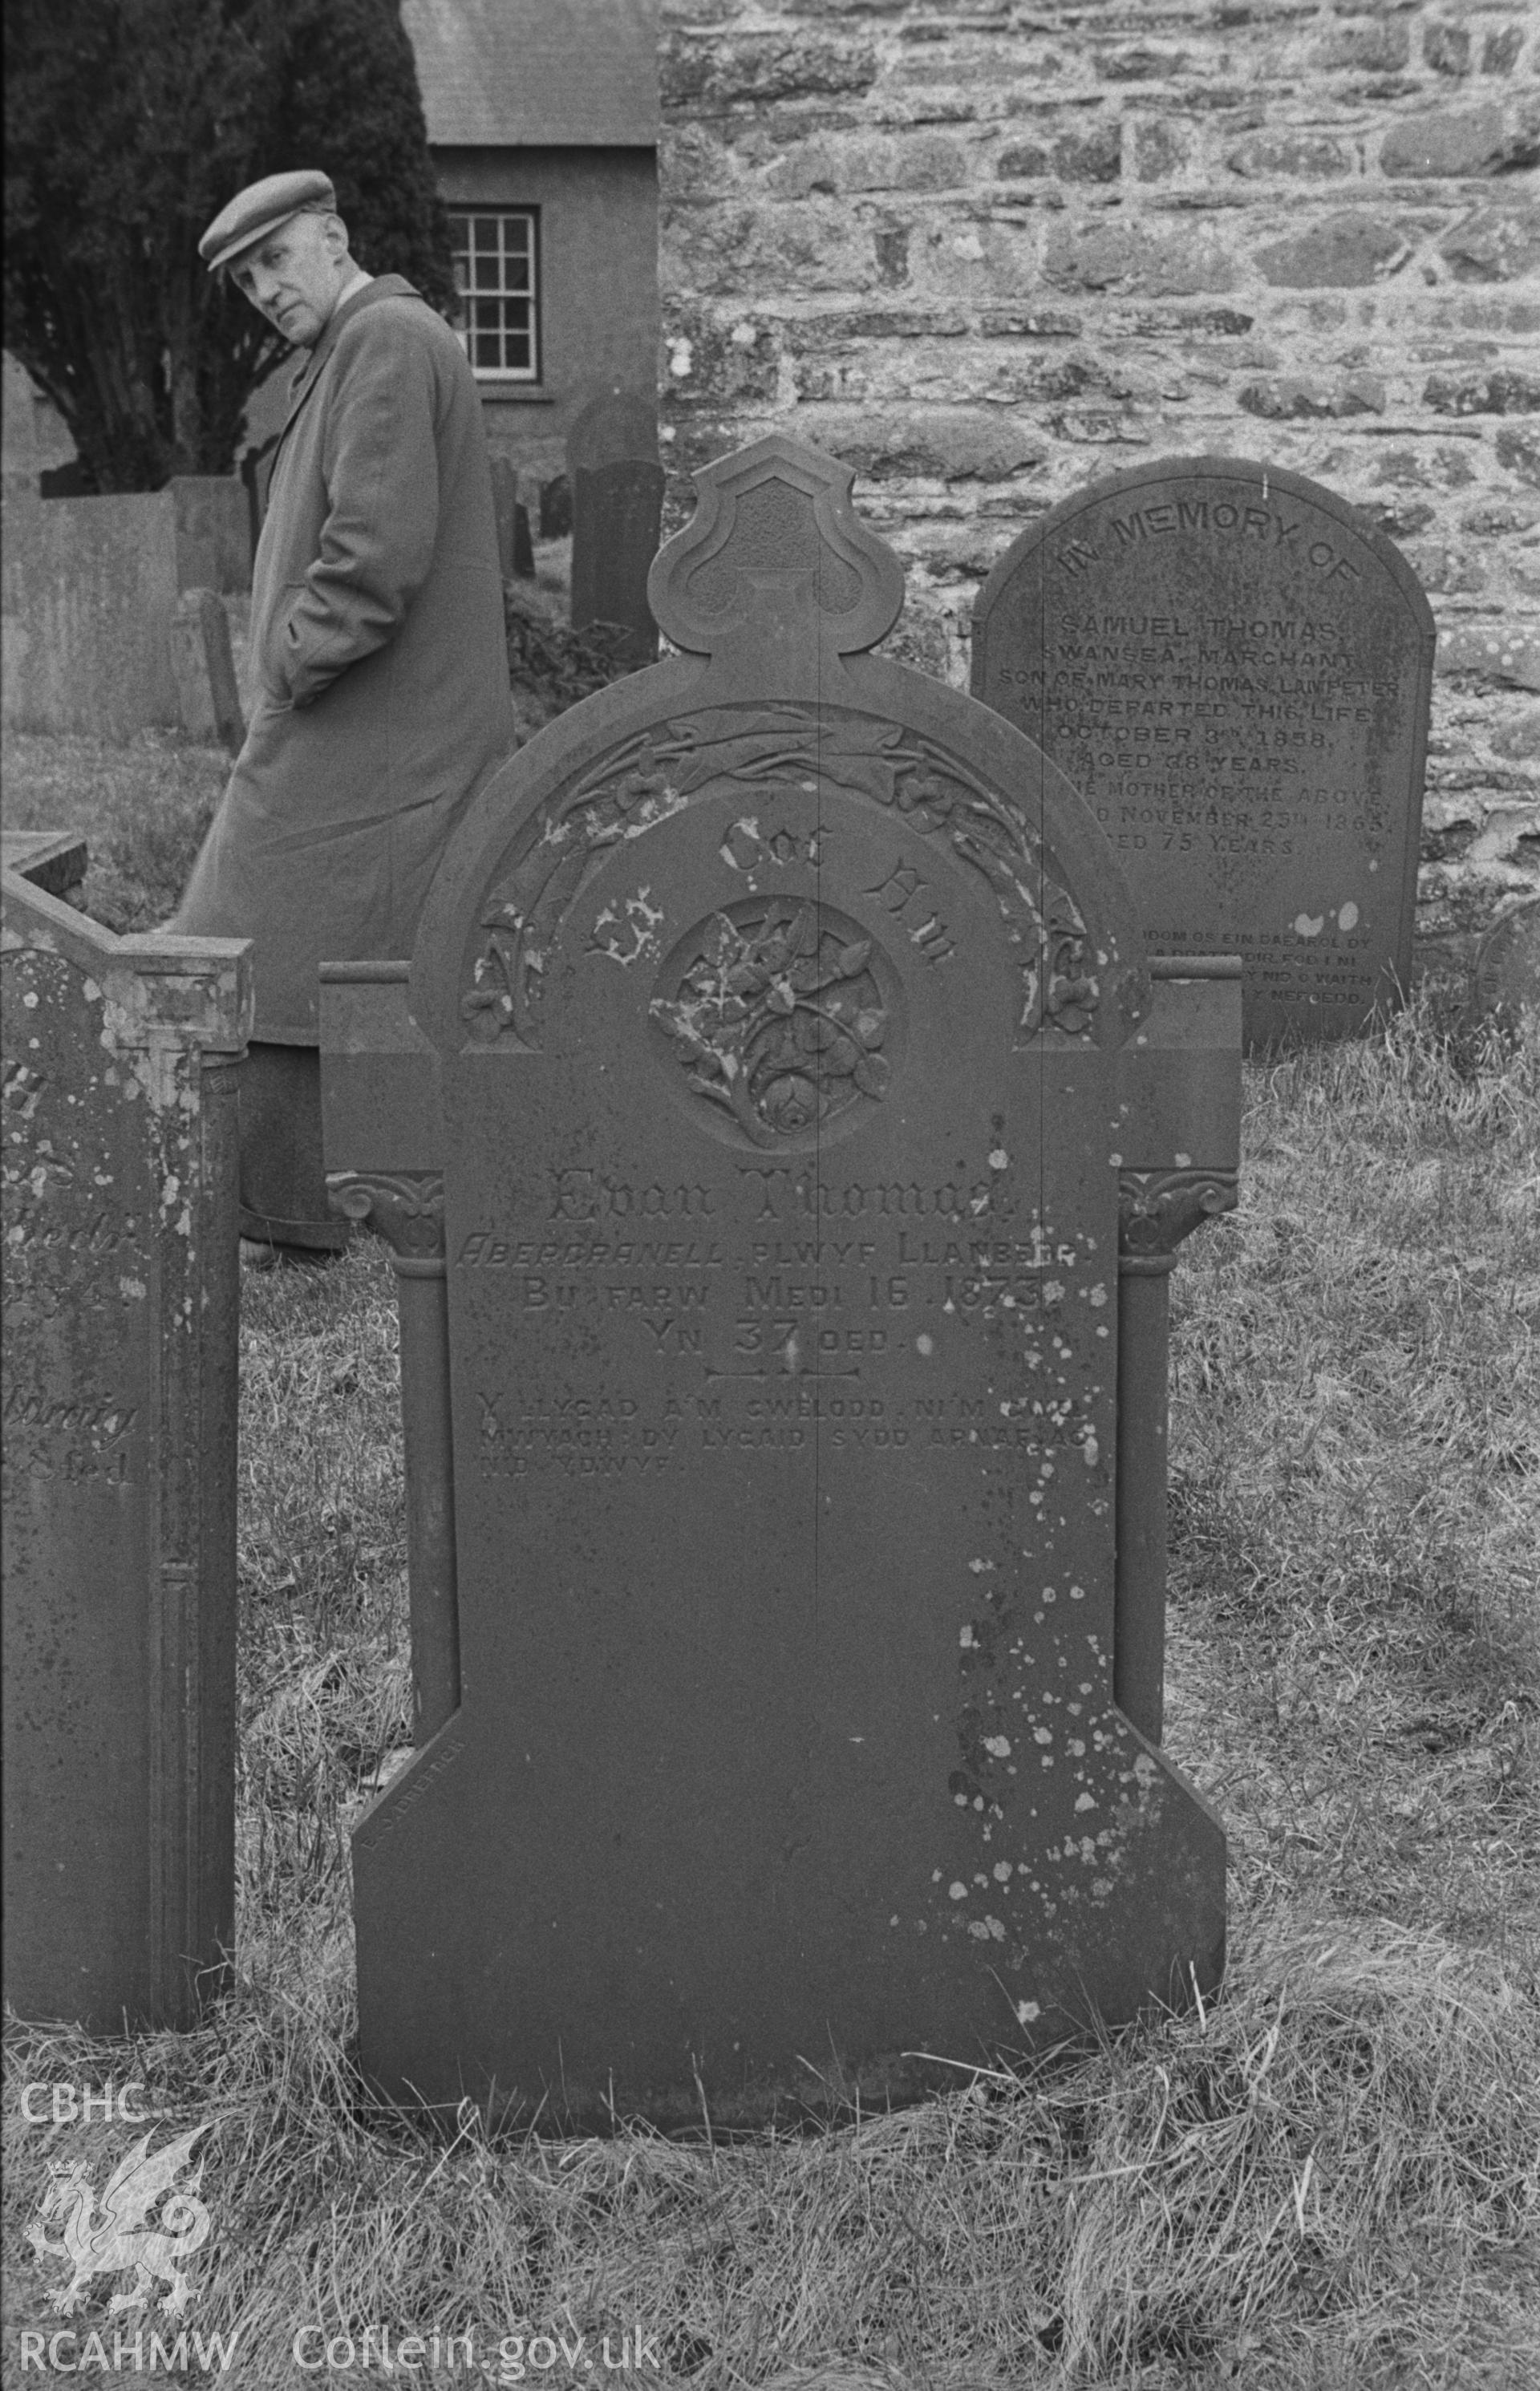 Digital copy of a black and white negative showing two tombstone in St Gwynin's churchyard to the south of the church, both with Calystegia motif for decoration. Photographed in April 1963 by Arthur O. Chater from Grid Reference SN 5332 4725.